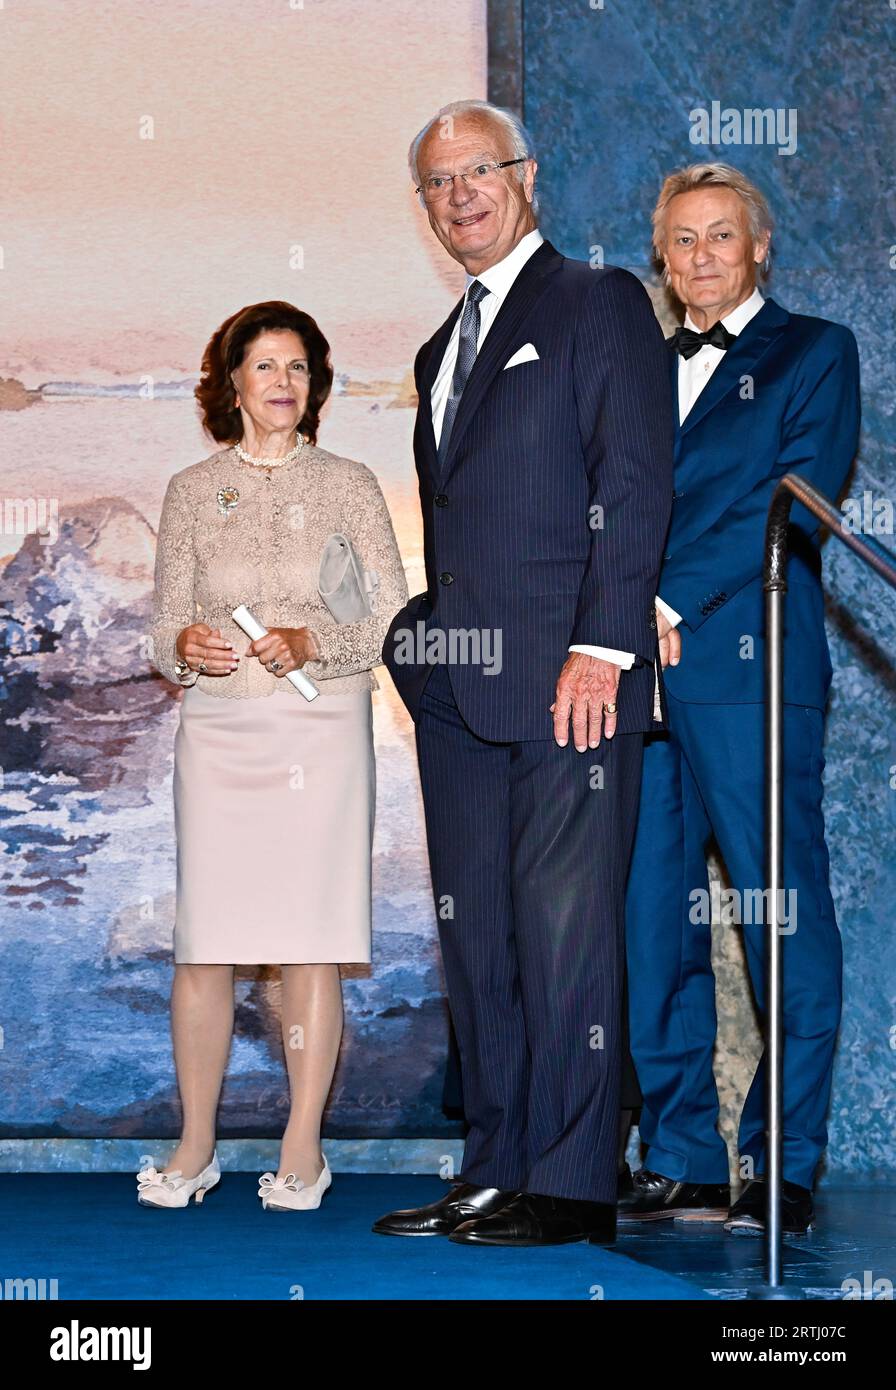 STOCKHOLM 20230913 King Carl Gustaf, Queen Silvia, and Swedish artist Lars Lerin at a reception at the Royal Palace in Stockholm where a gift from the parliament and government was handed over to the King, who celebrates 50 years on the throne. The gift is an eight-square meter fabric made after a watercolor painting by Swedish artist Lars Lerin. Frida Lindberg has been artistic director and weavers have been Ebba Bergström and Tova Vibrandt.  Photo: Jonas Ekstromer / TT / code 10030 Stock Photo